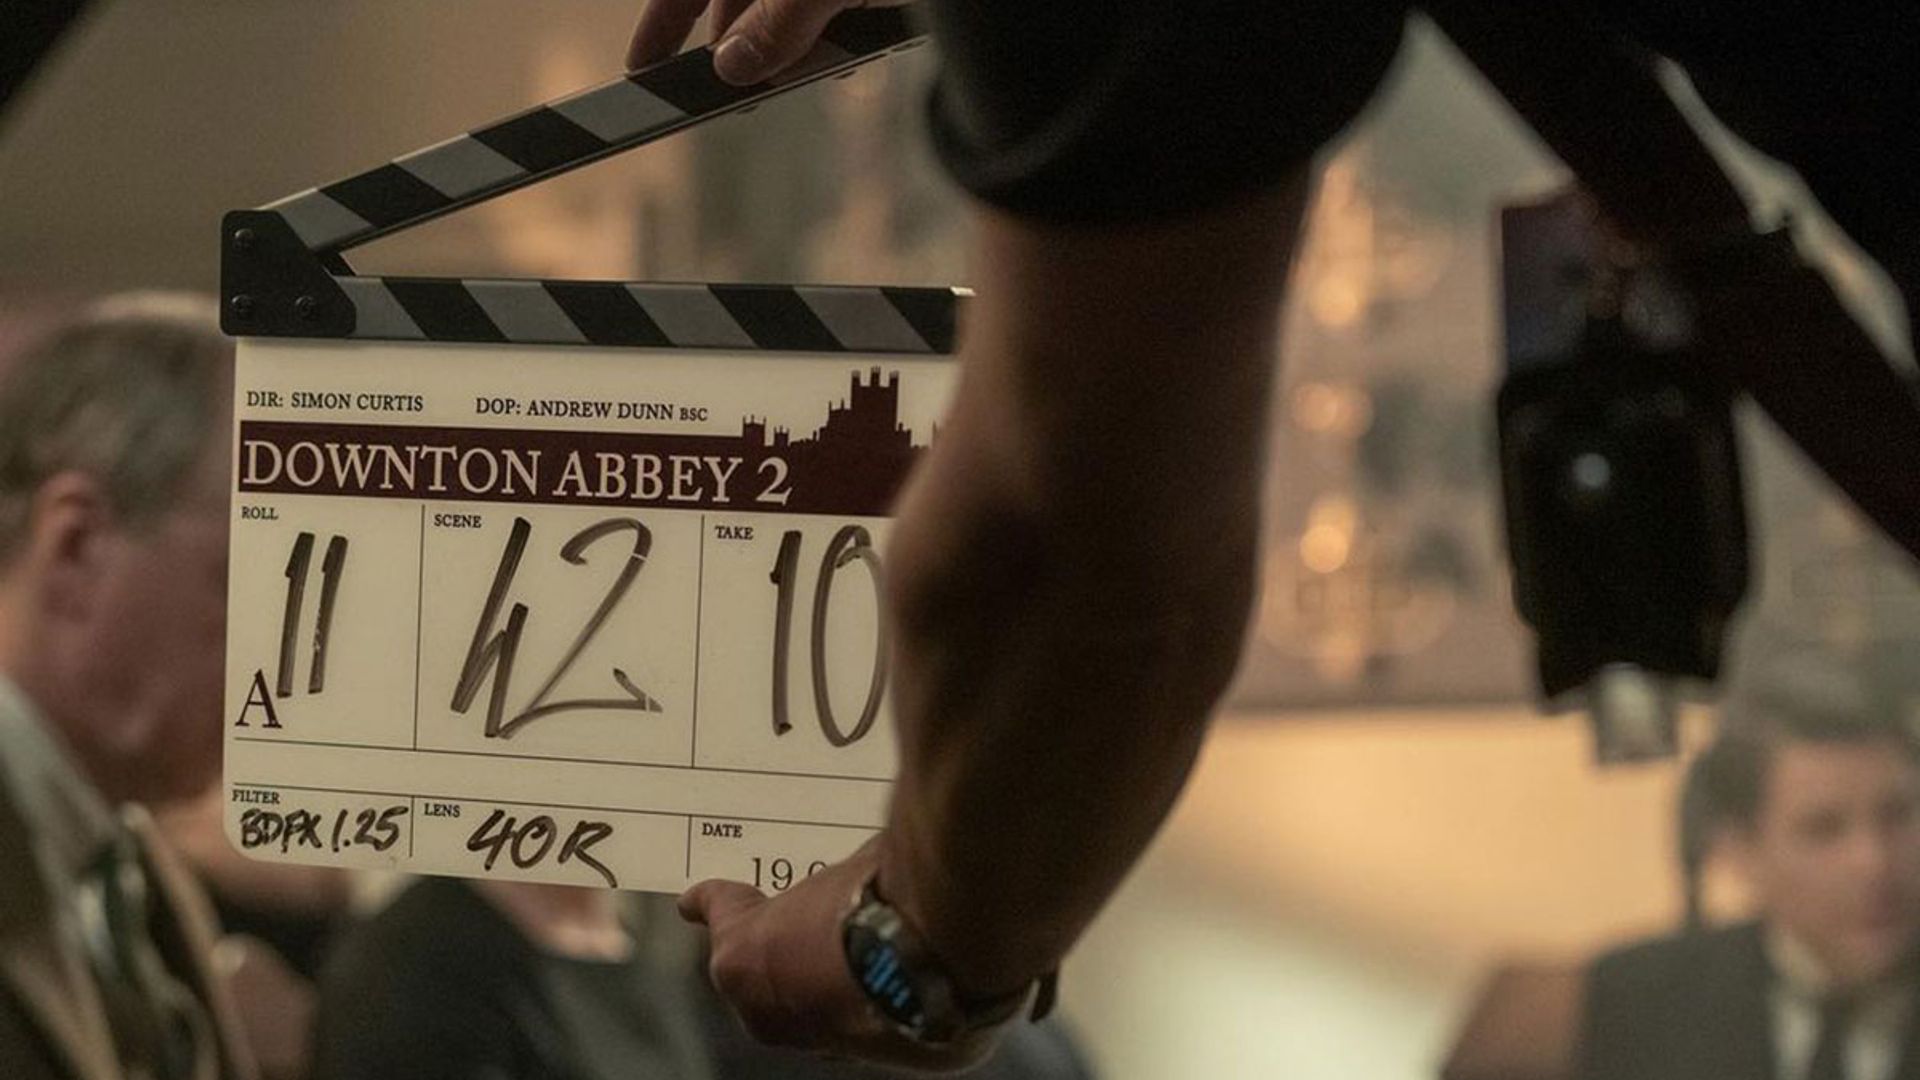 Downton Abbey fans thrilled as filming for much-anticipated sequel kicks off